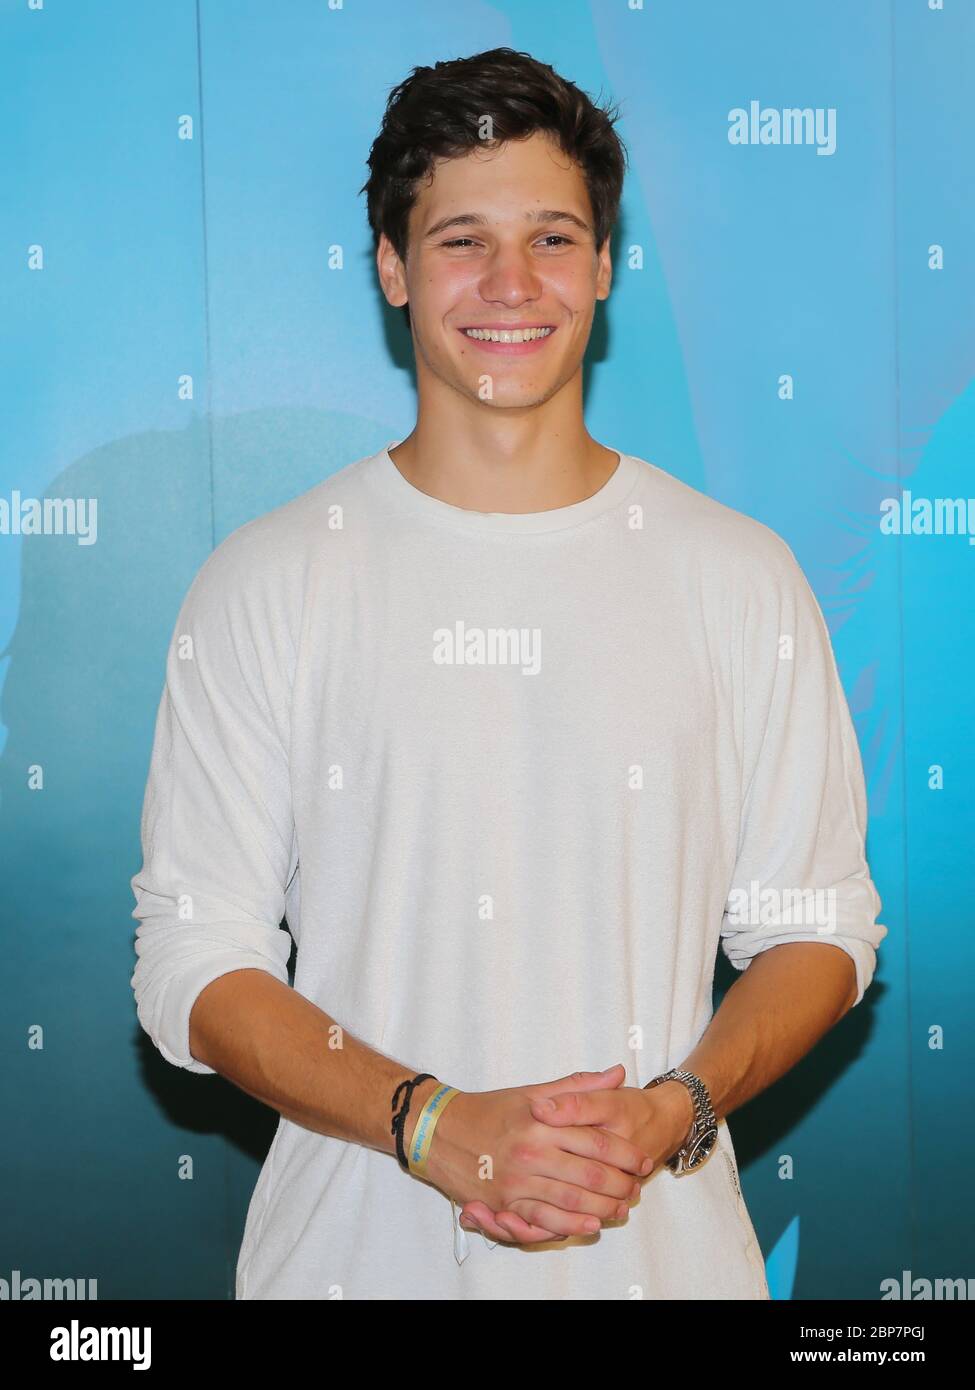 German pop singer songwriter Wincent at Stars for Free 2019 in Magdeburg Photo -